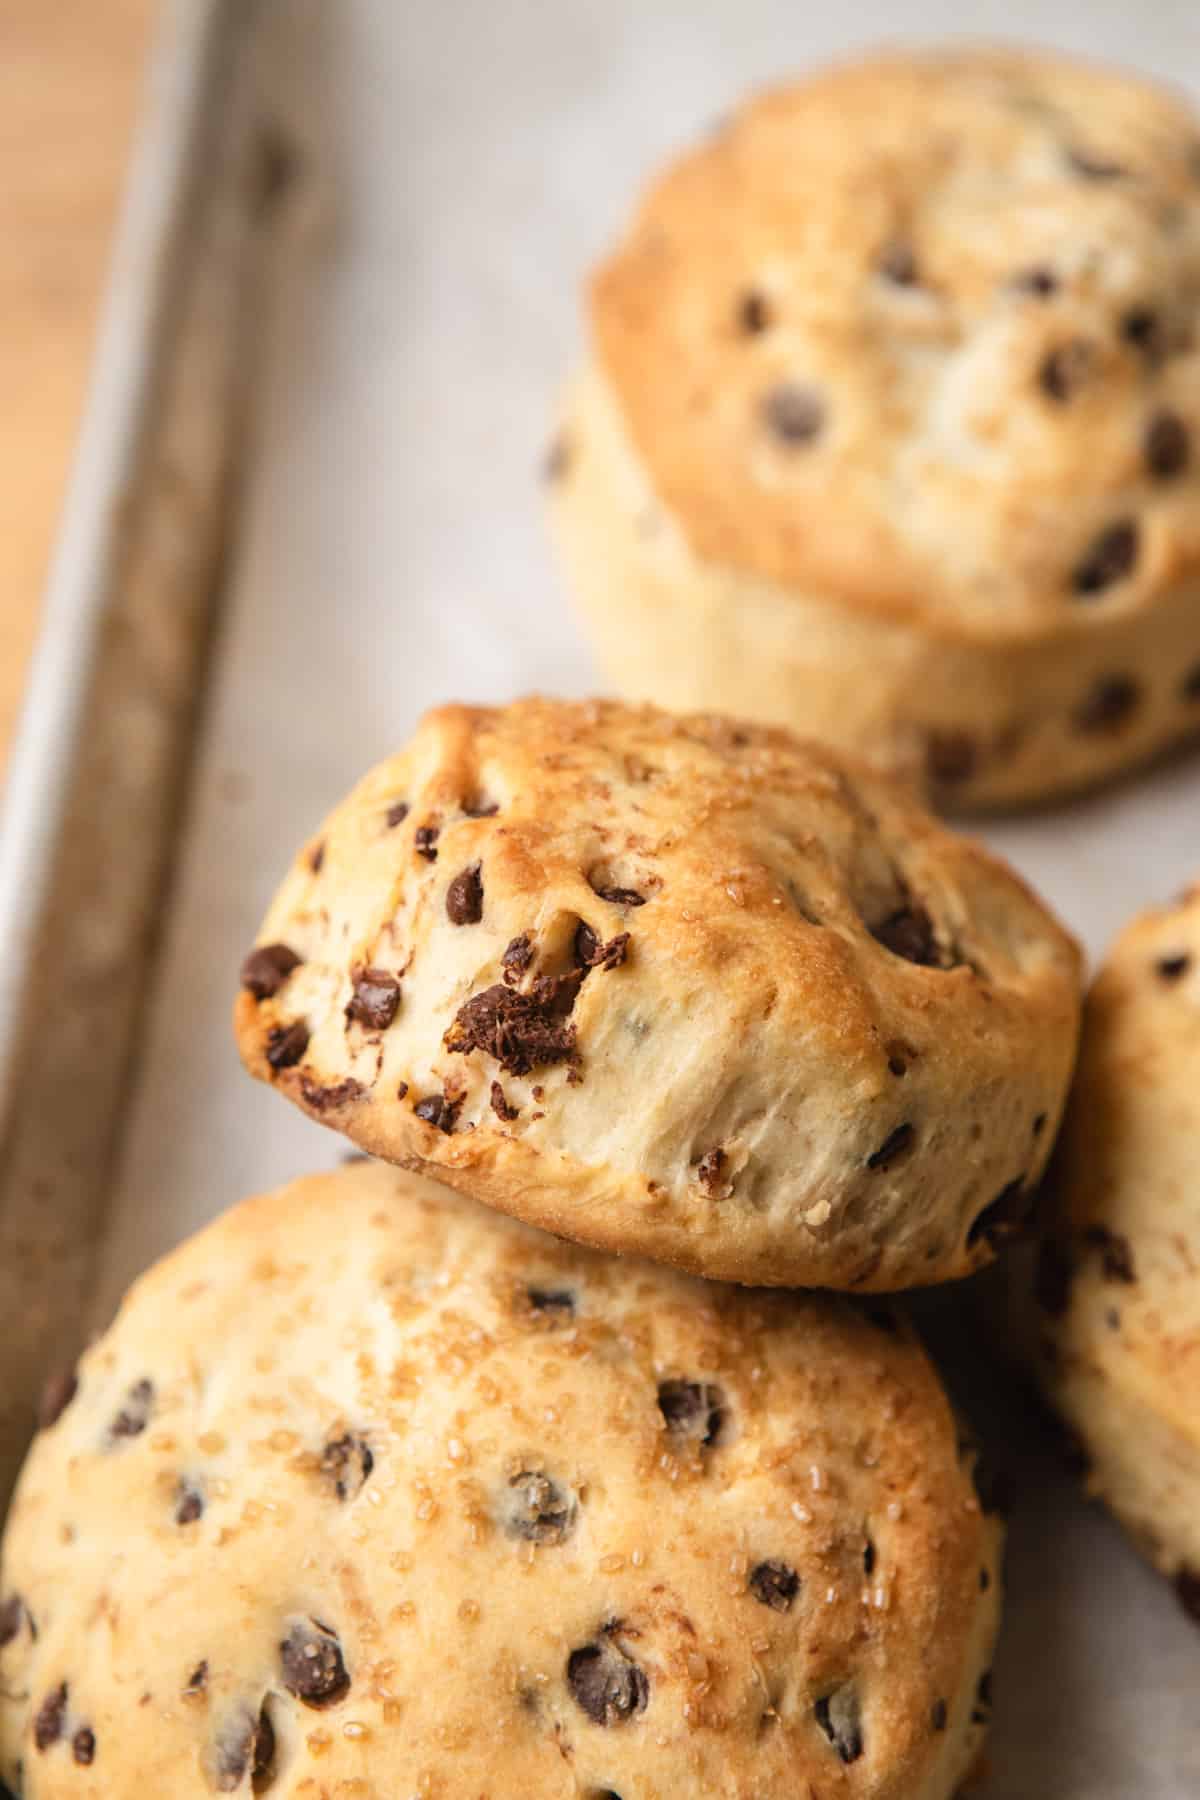 Chocolate chip biscuits on a baking sheet.